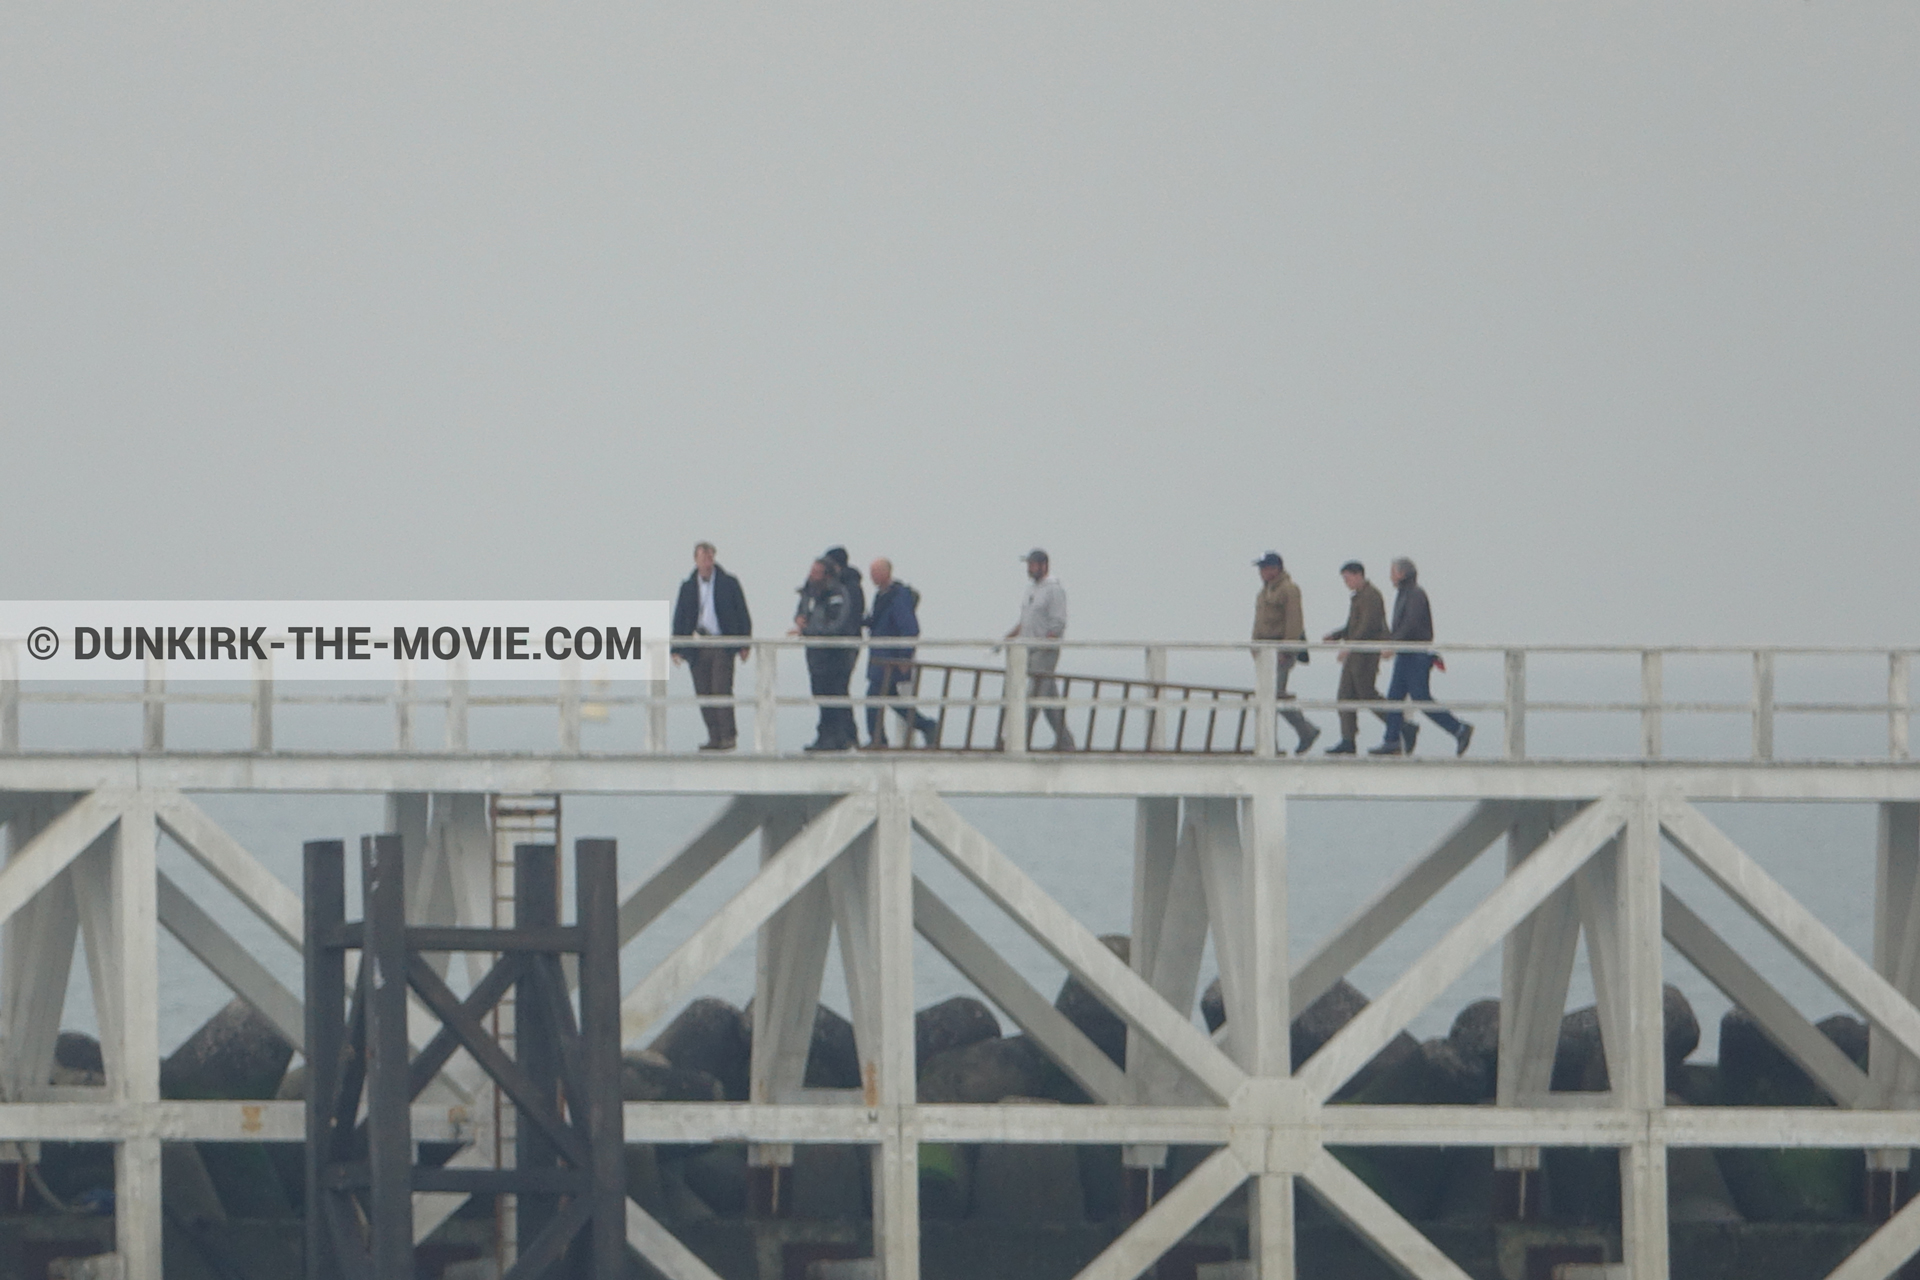 Picture with grey sky, Hoyte van Hoytema, EST pier, Christopher Nolan, technical team,  from behind the scene of the Dunkirk movie by Nolan